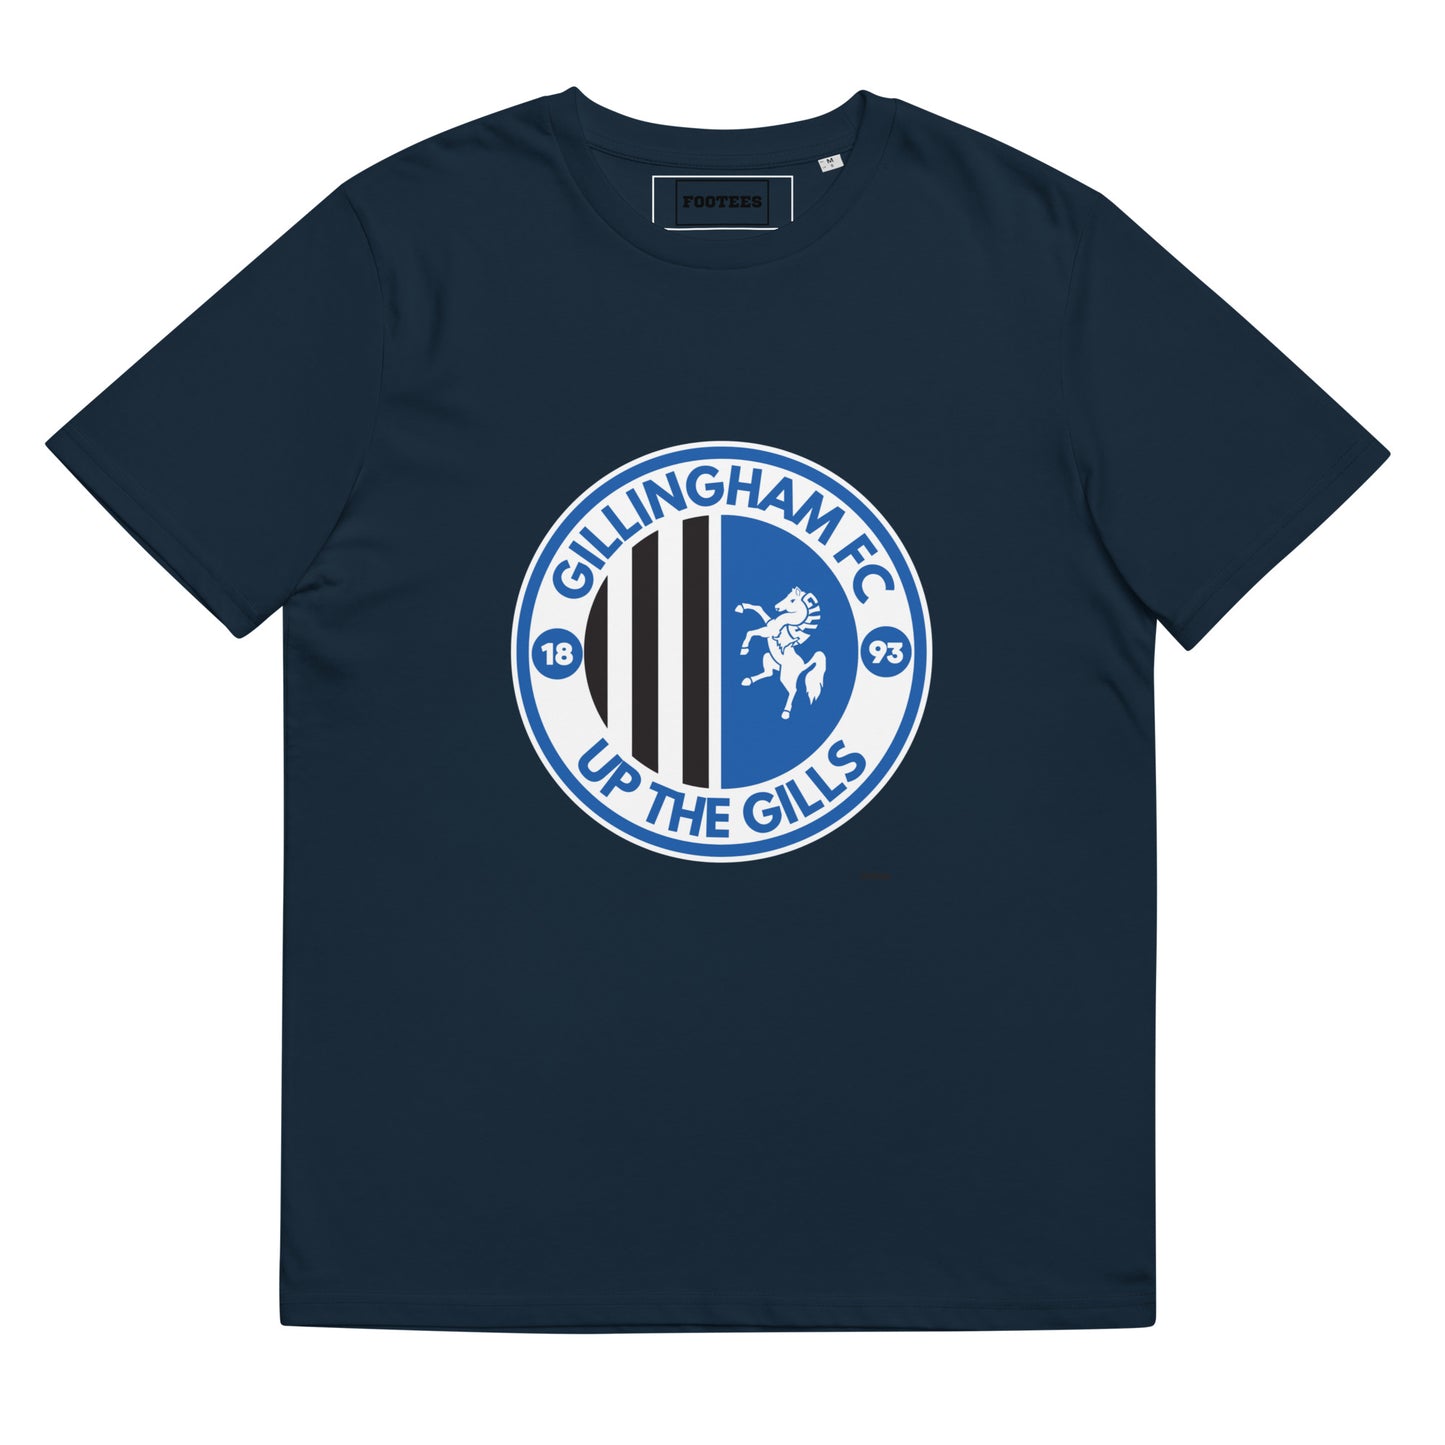 Up the Gills Tee